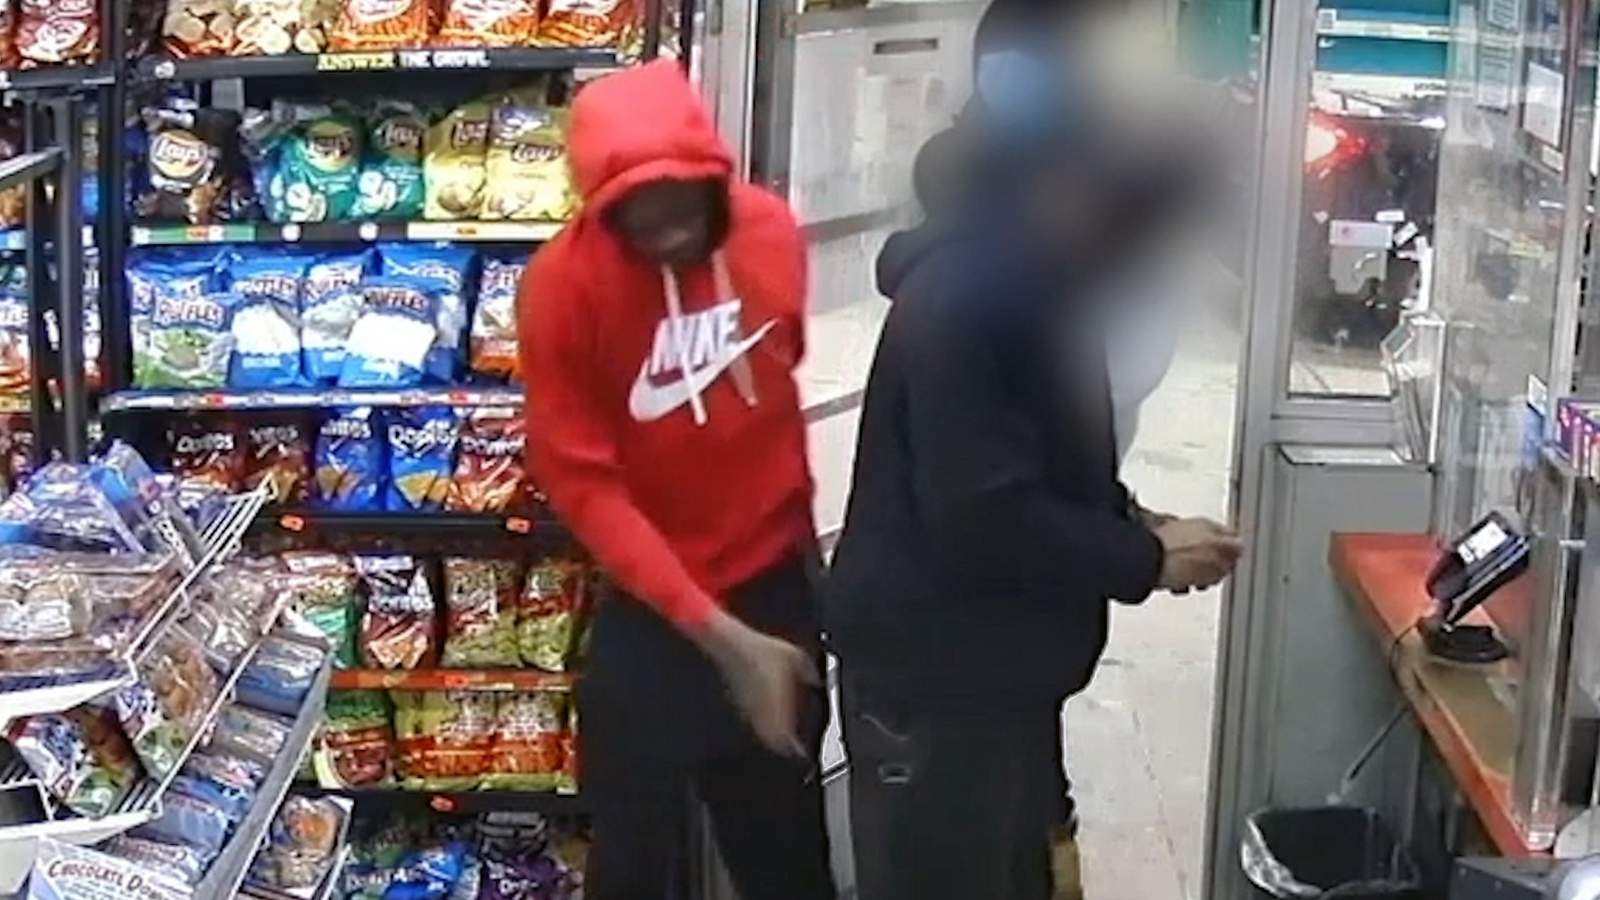 VIDEO: Man snatches gun from man at Detroit gas station counter